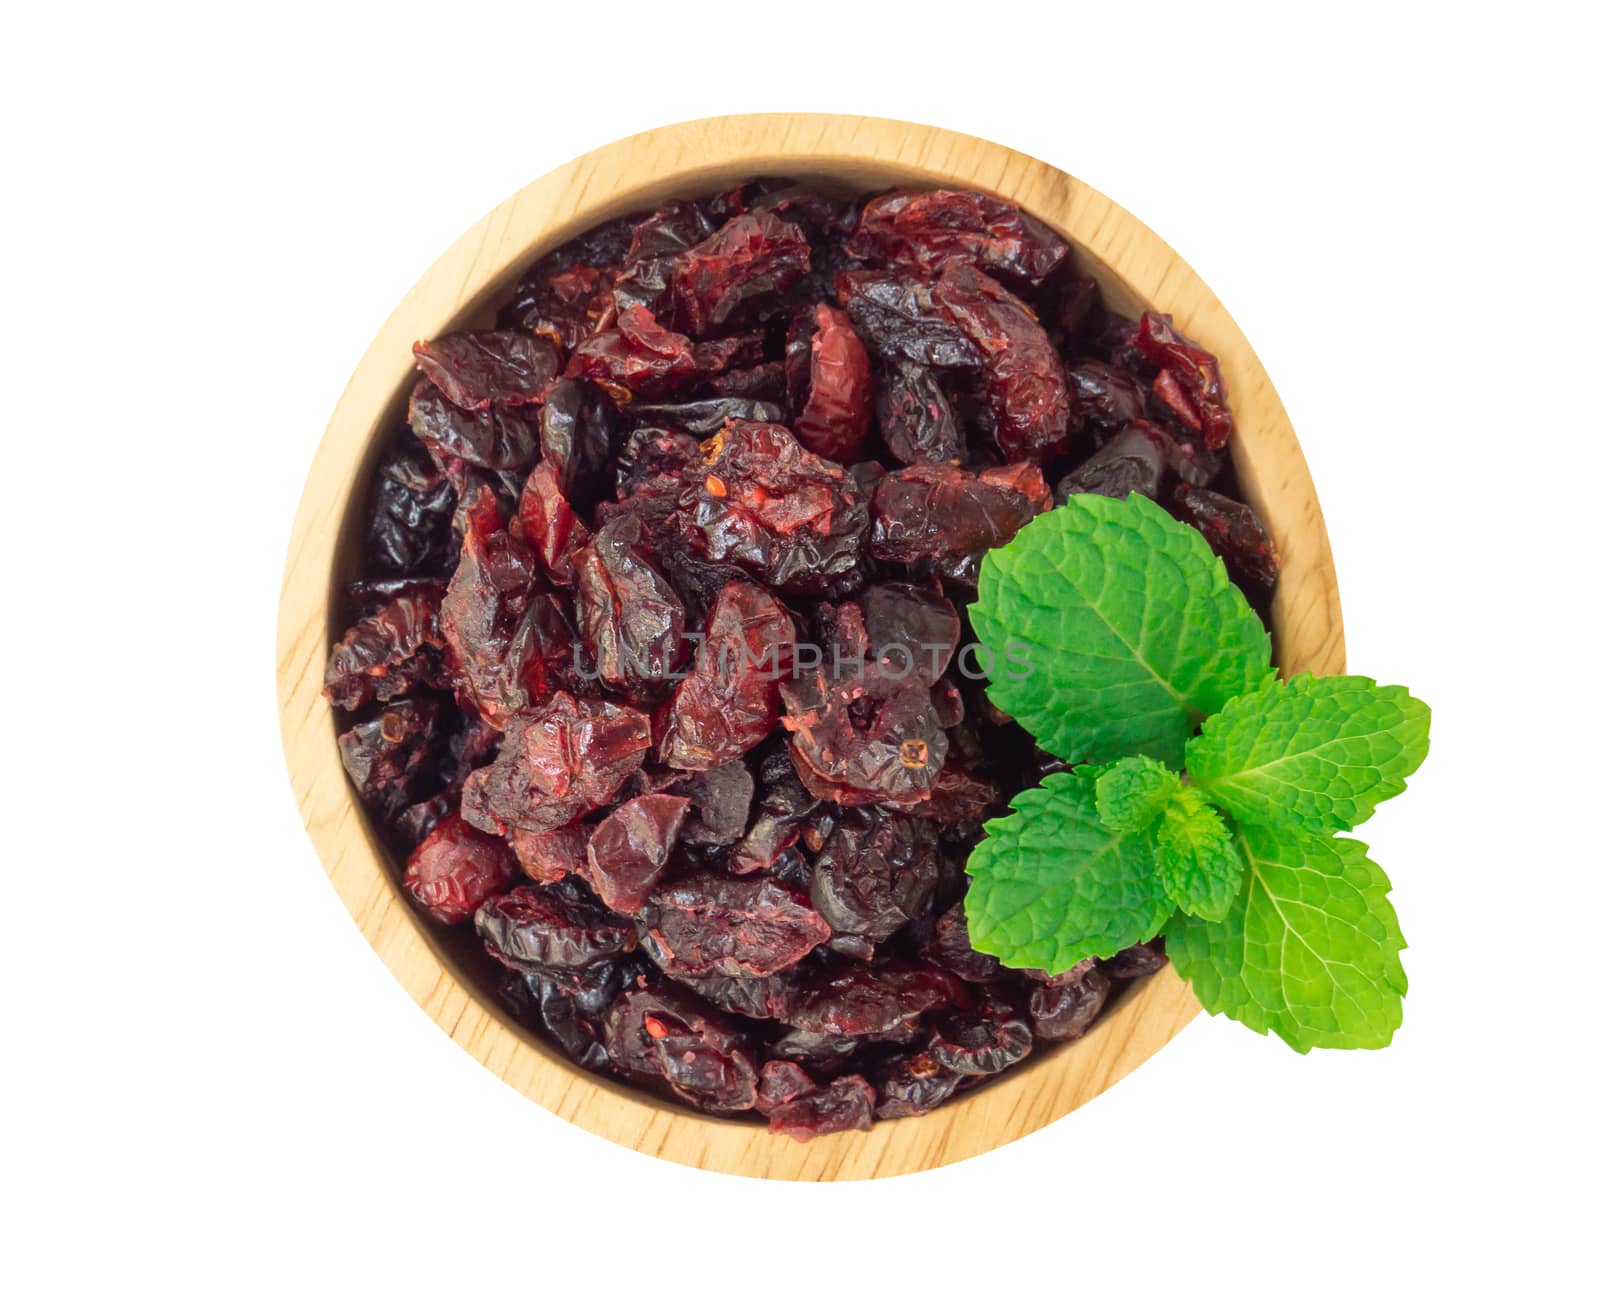 Dried canberry mix blueberry fruit in wood bowl isolated on white backgroud, food healty diet